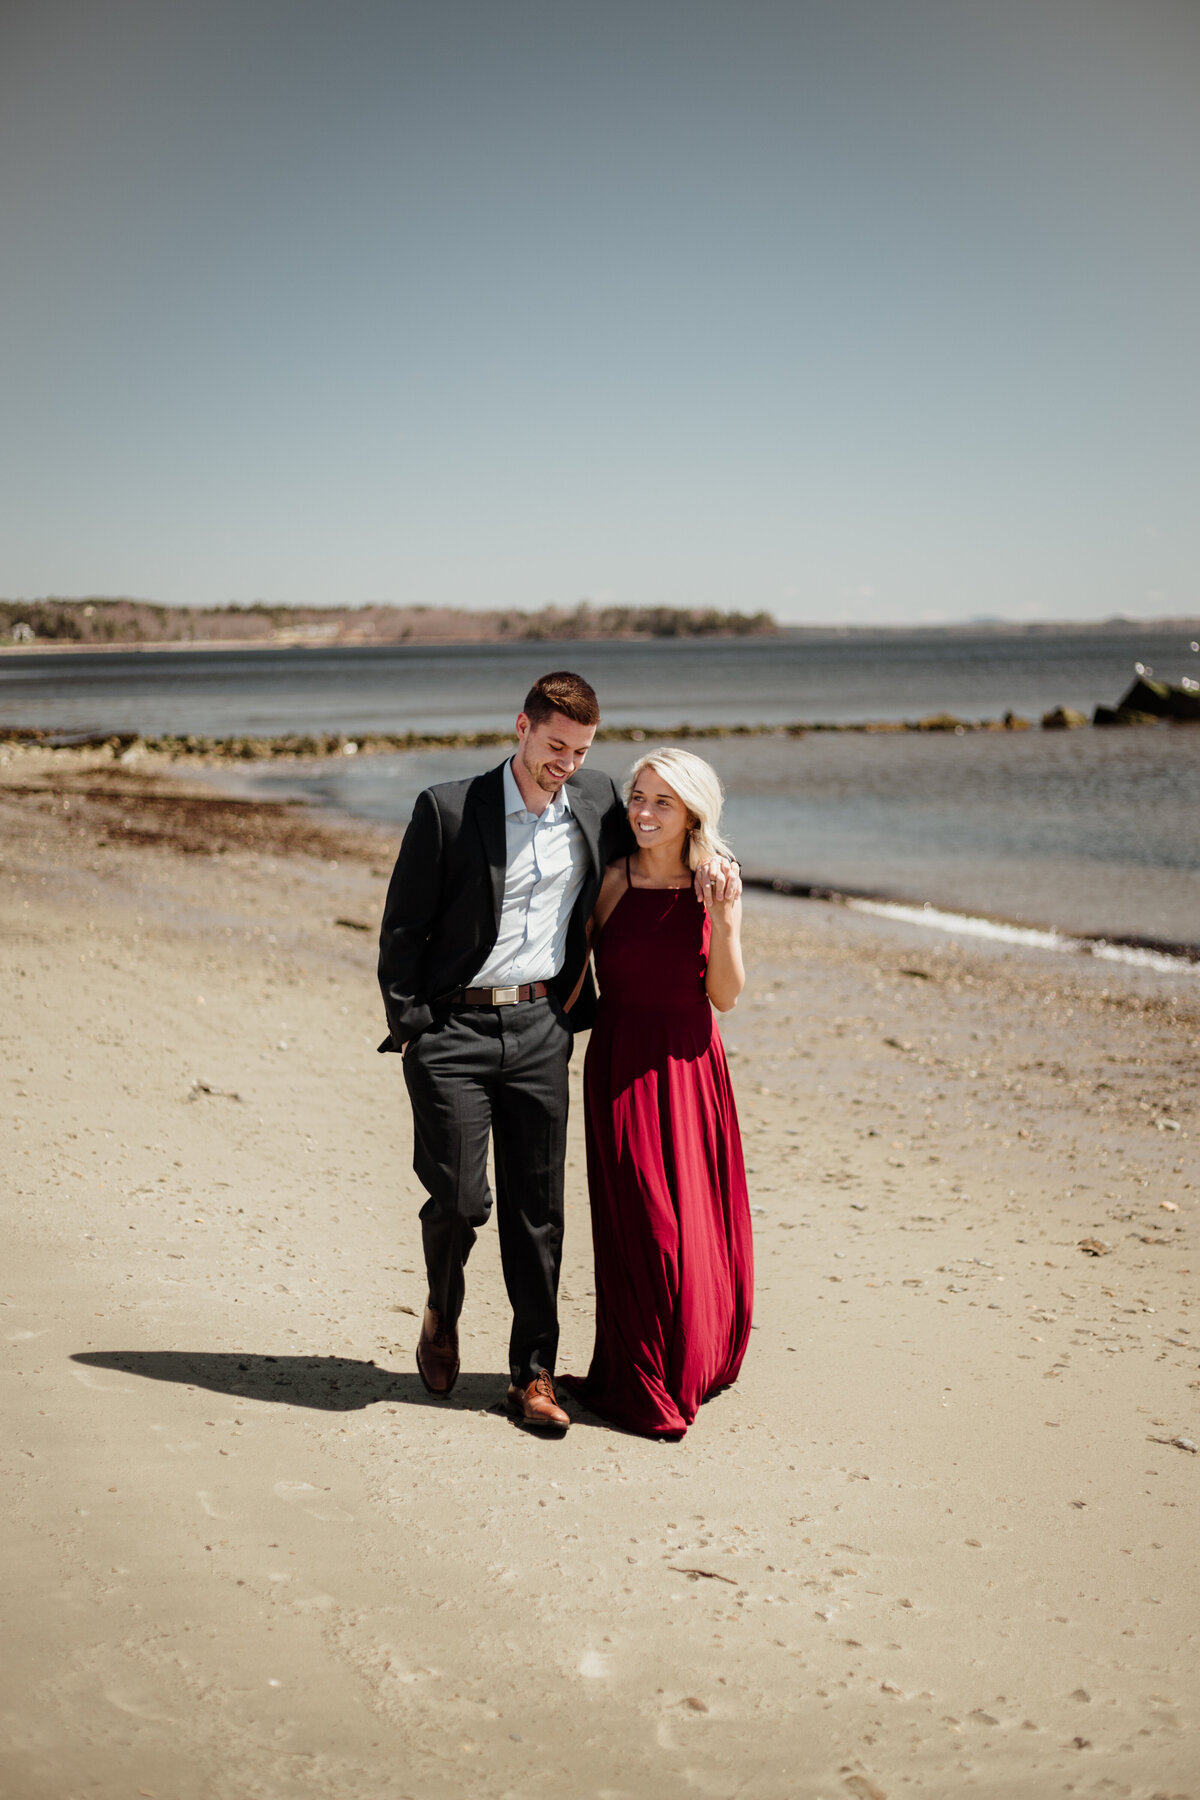 A romantic moment captured on Vermont's serene beaches, as a couple enjoys the sand, sea, and each other's company.